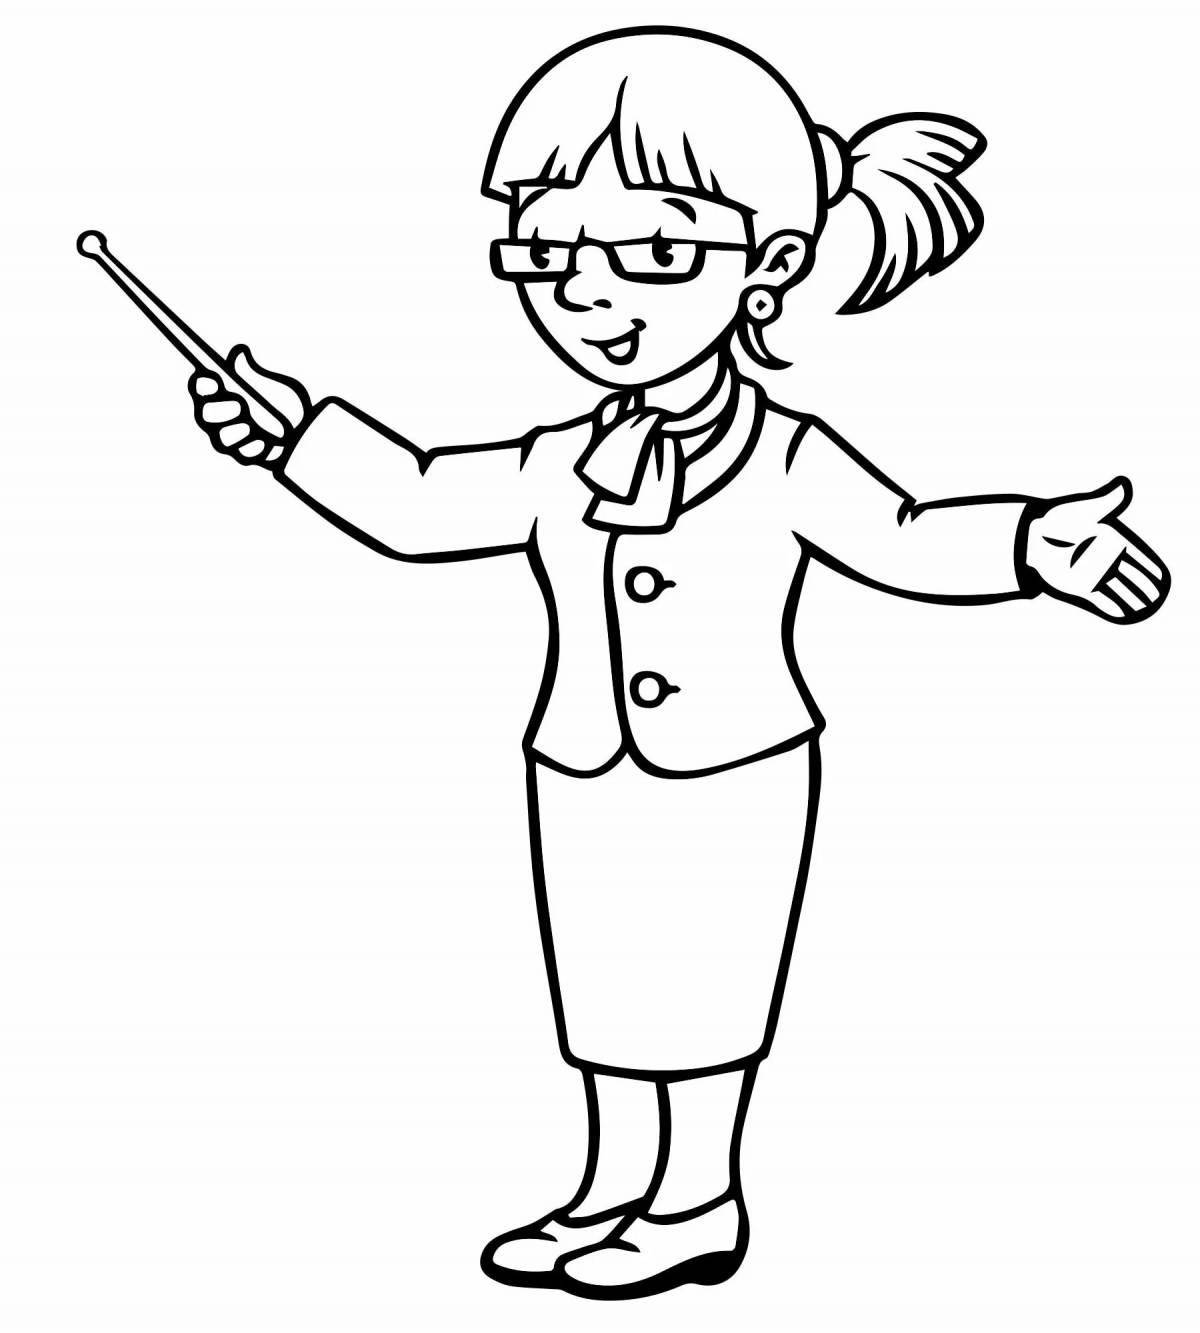 Teacher's colorful drawing coloring page